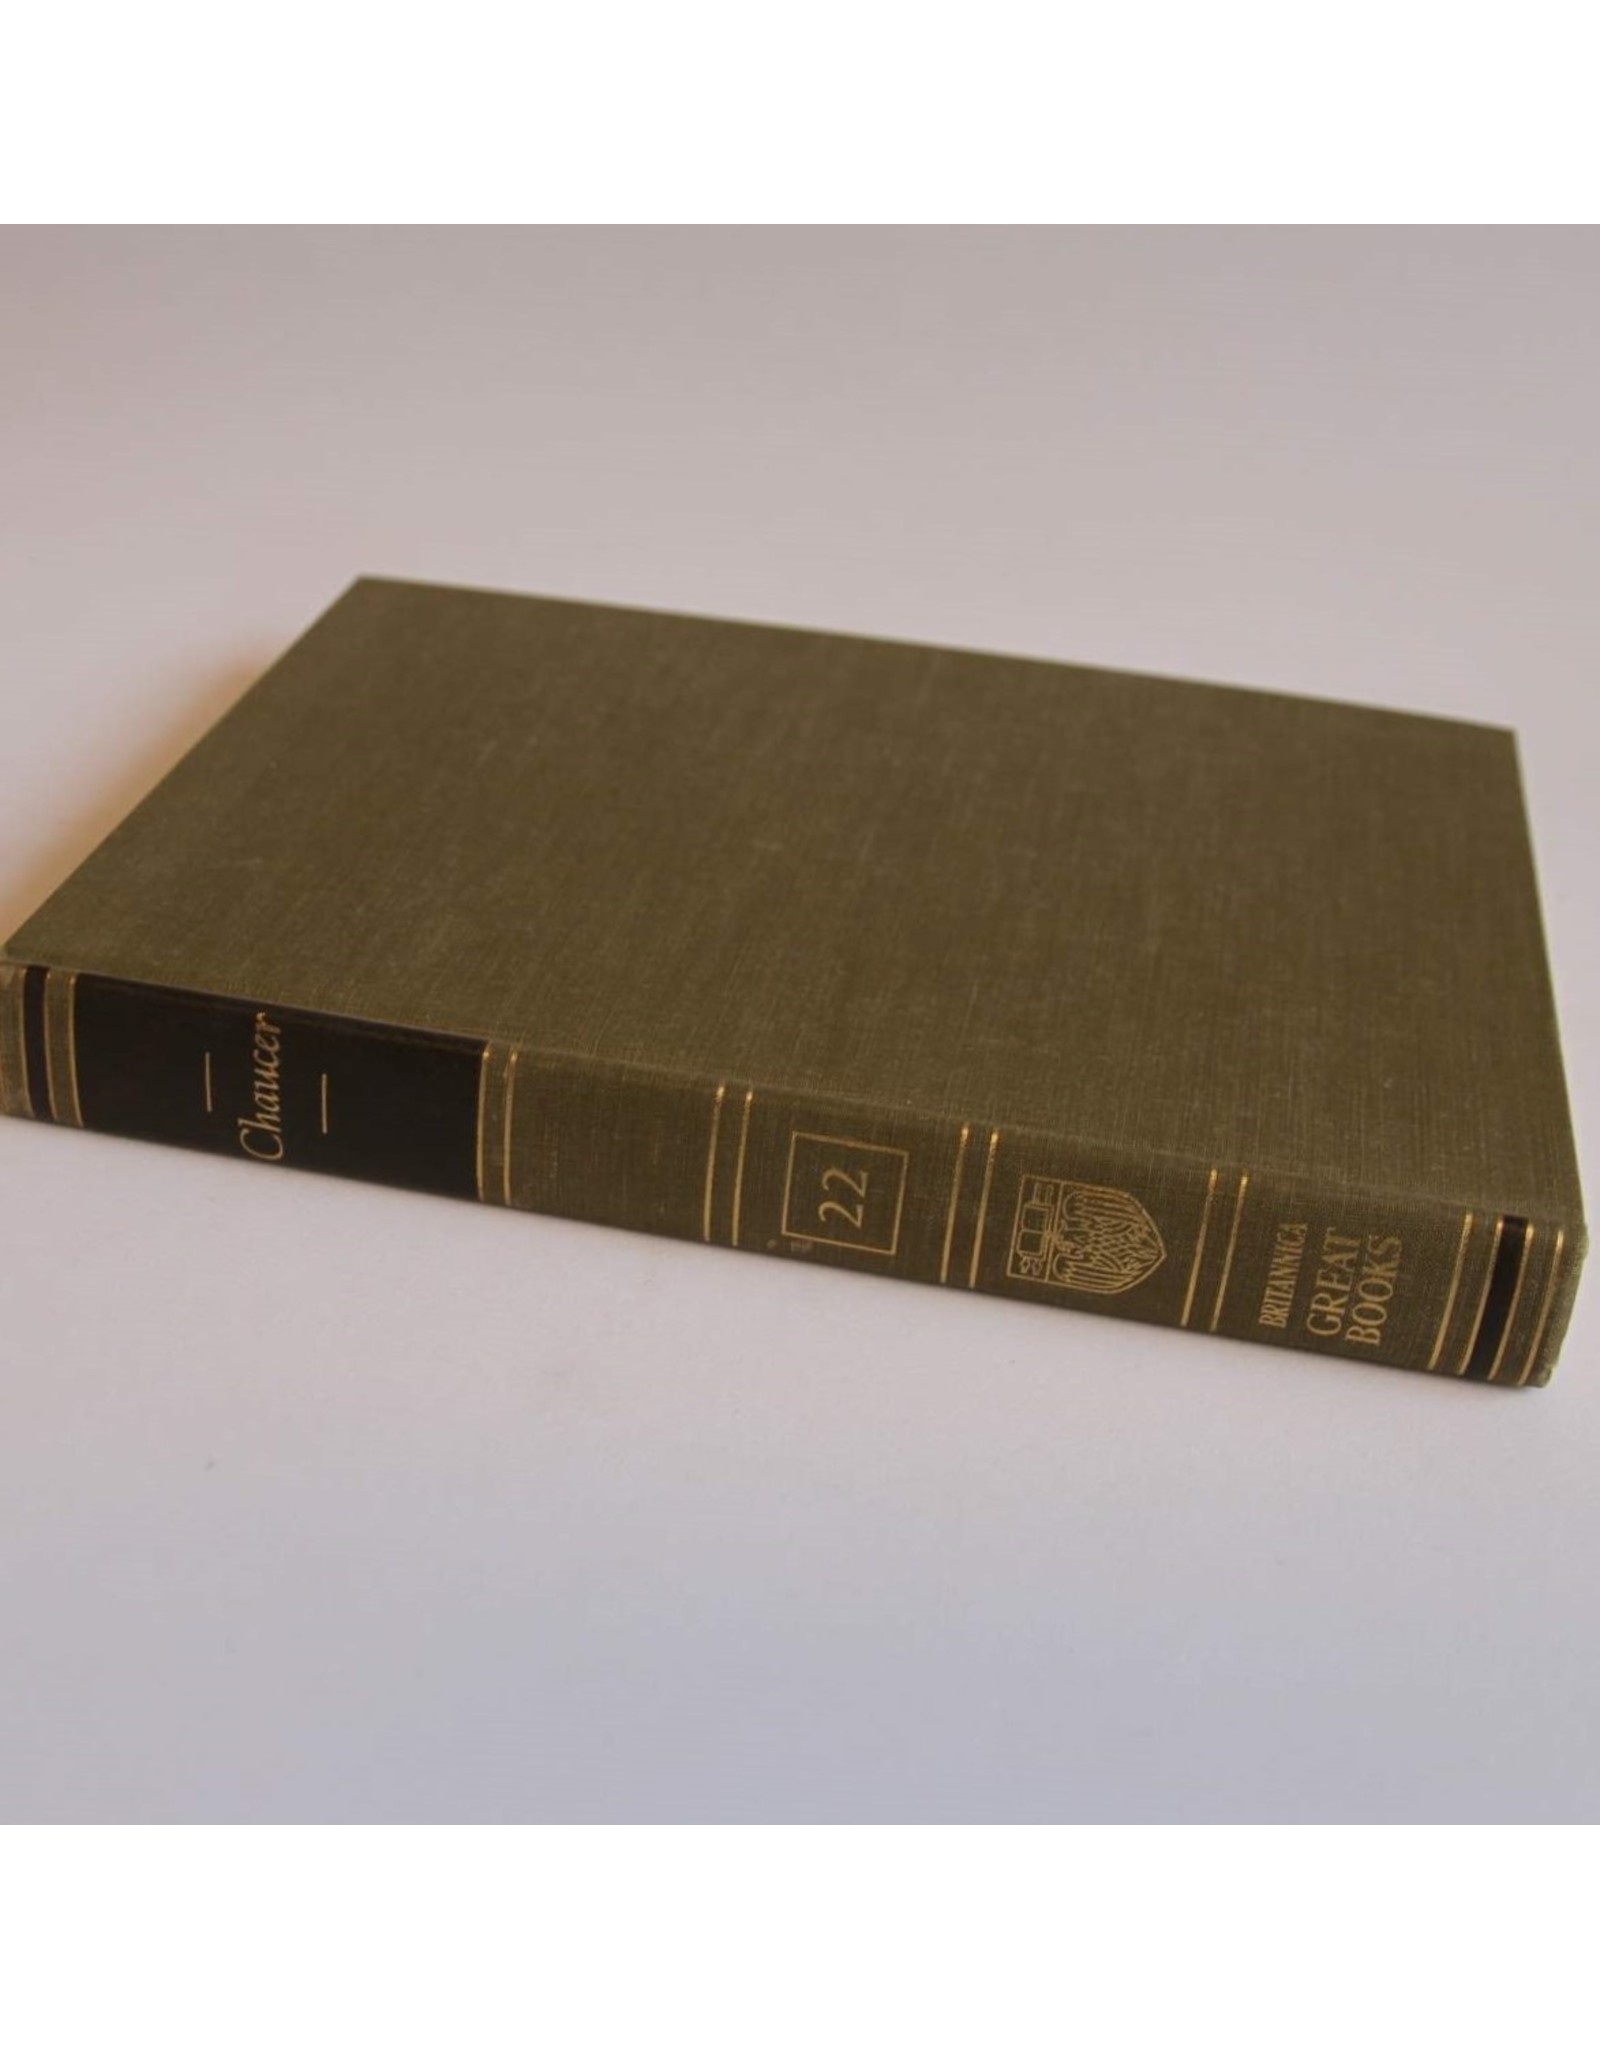 Hardcover book - Chaucer